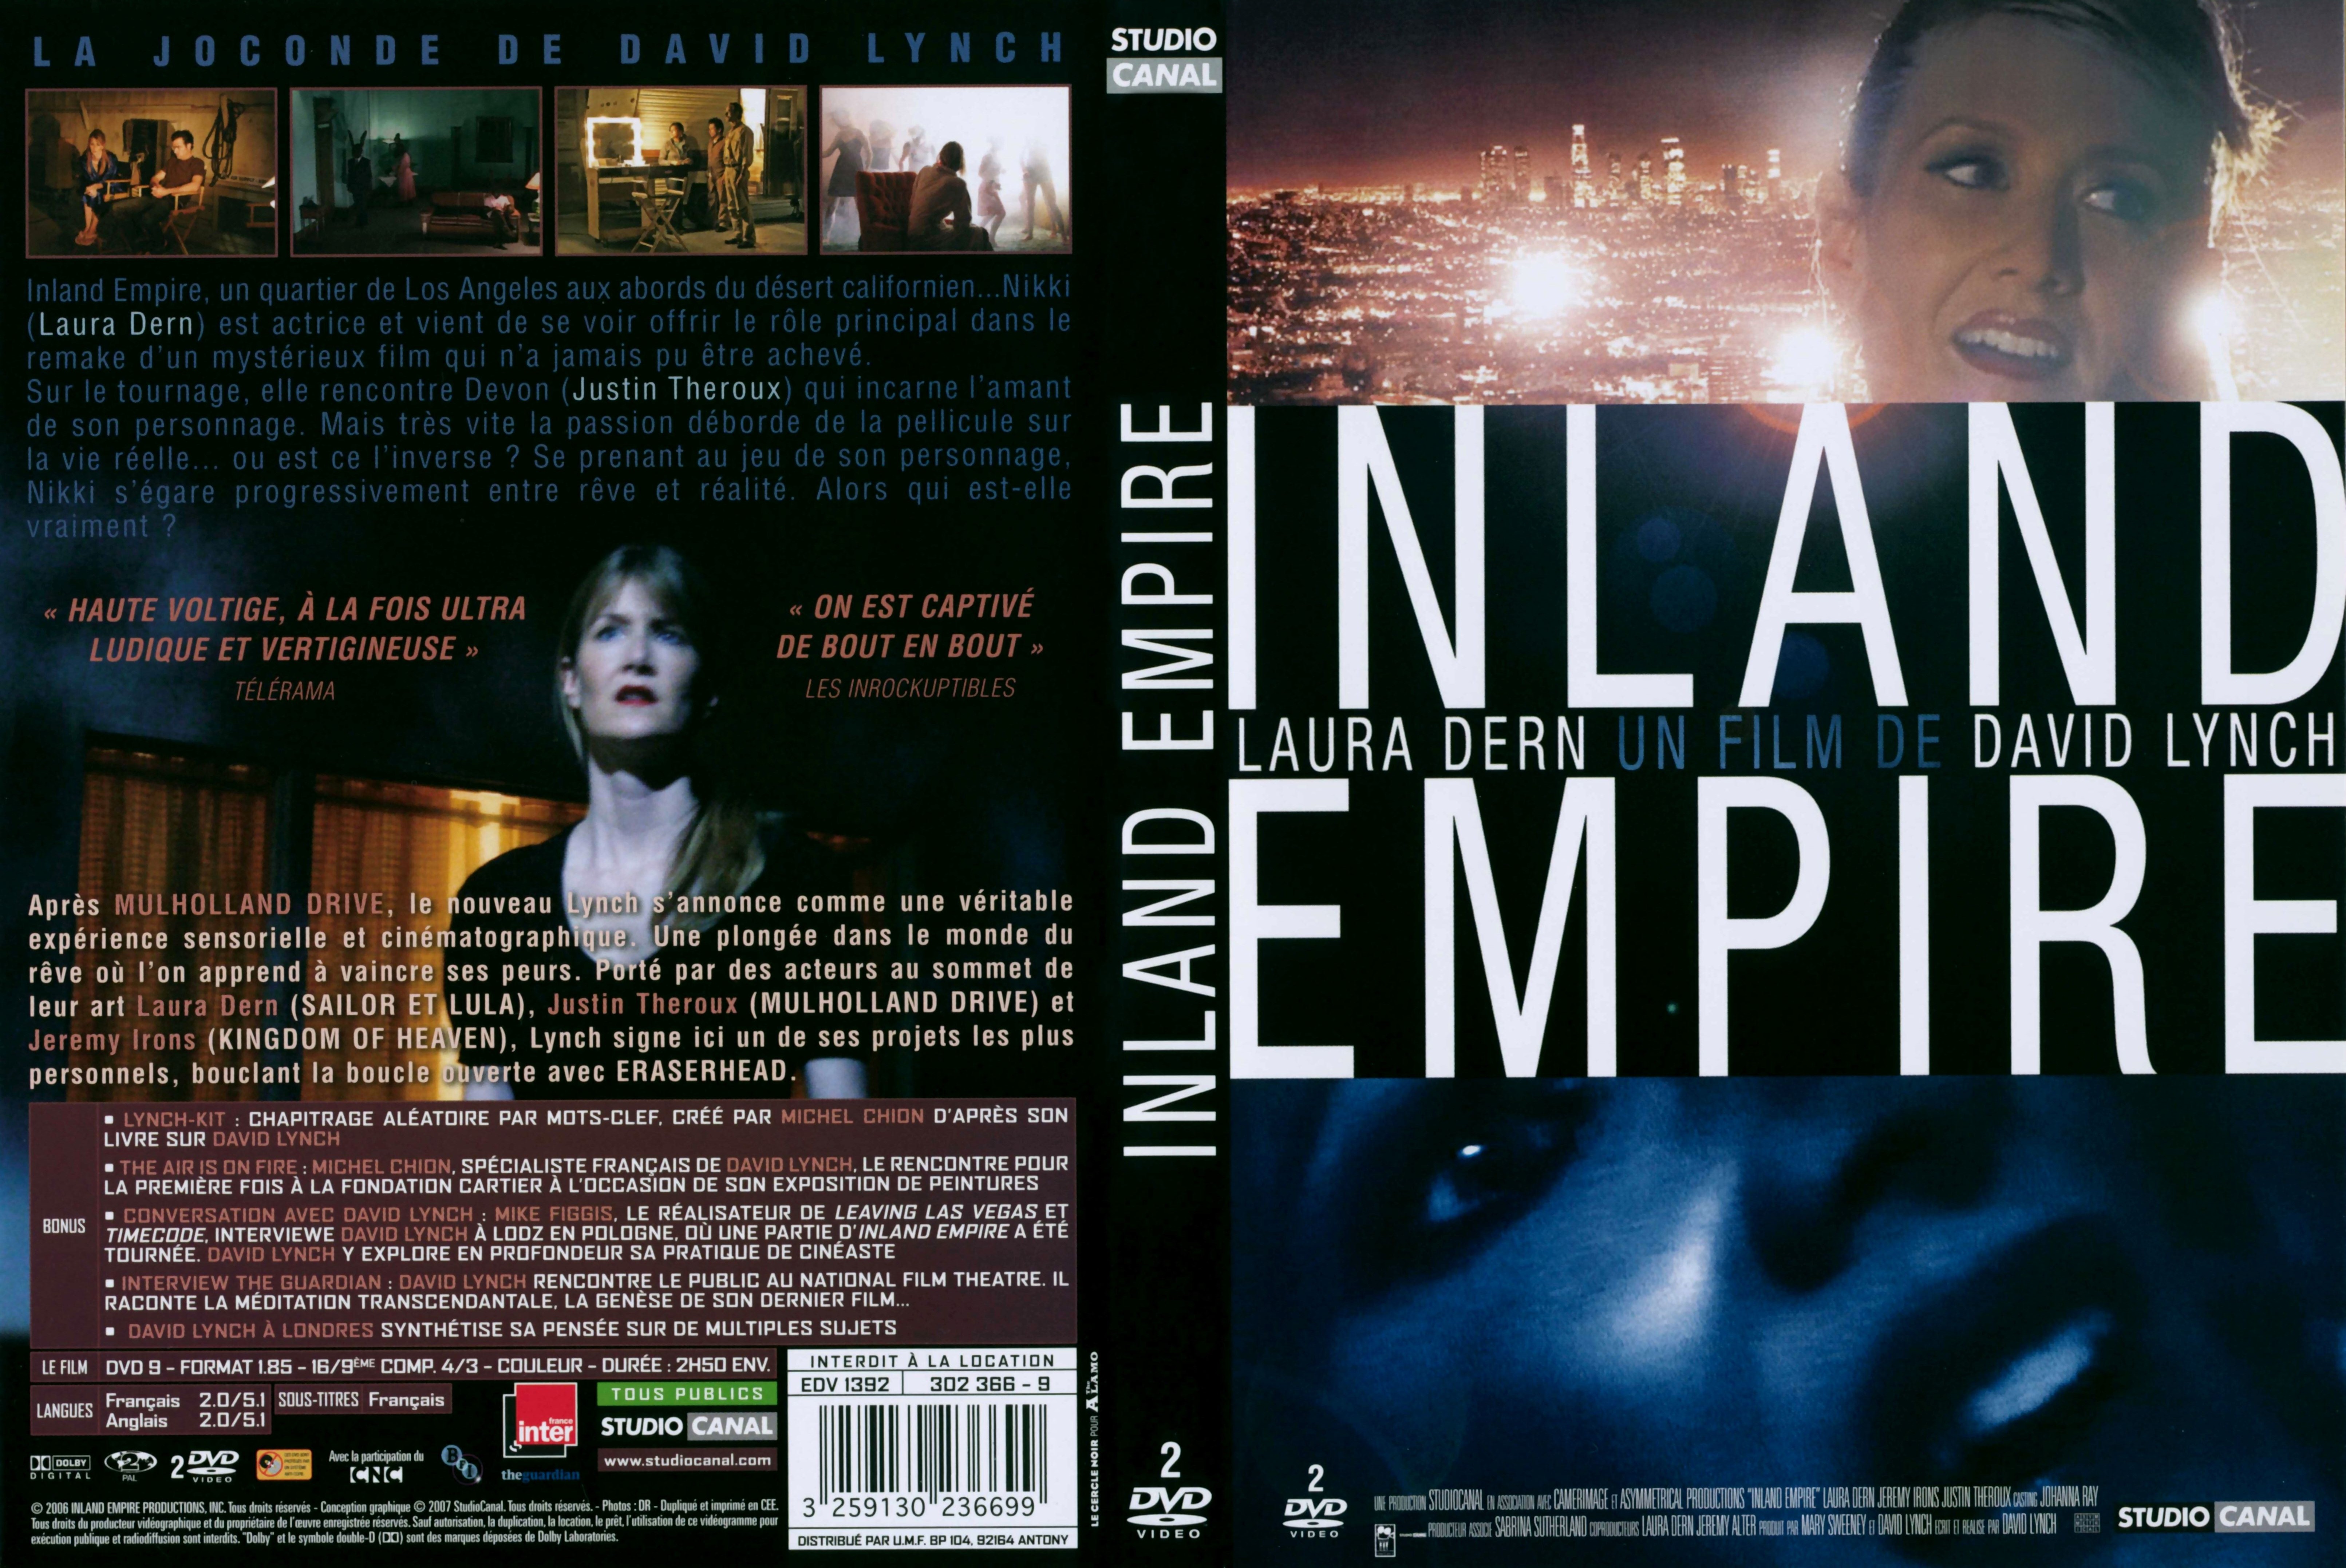 Jaquette DVD Inland empire